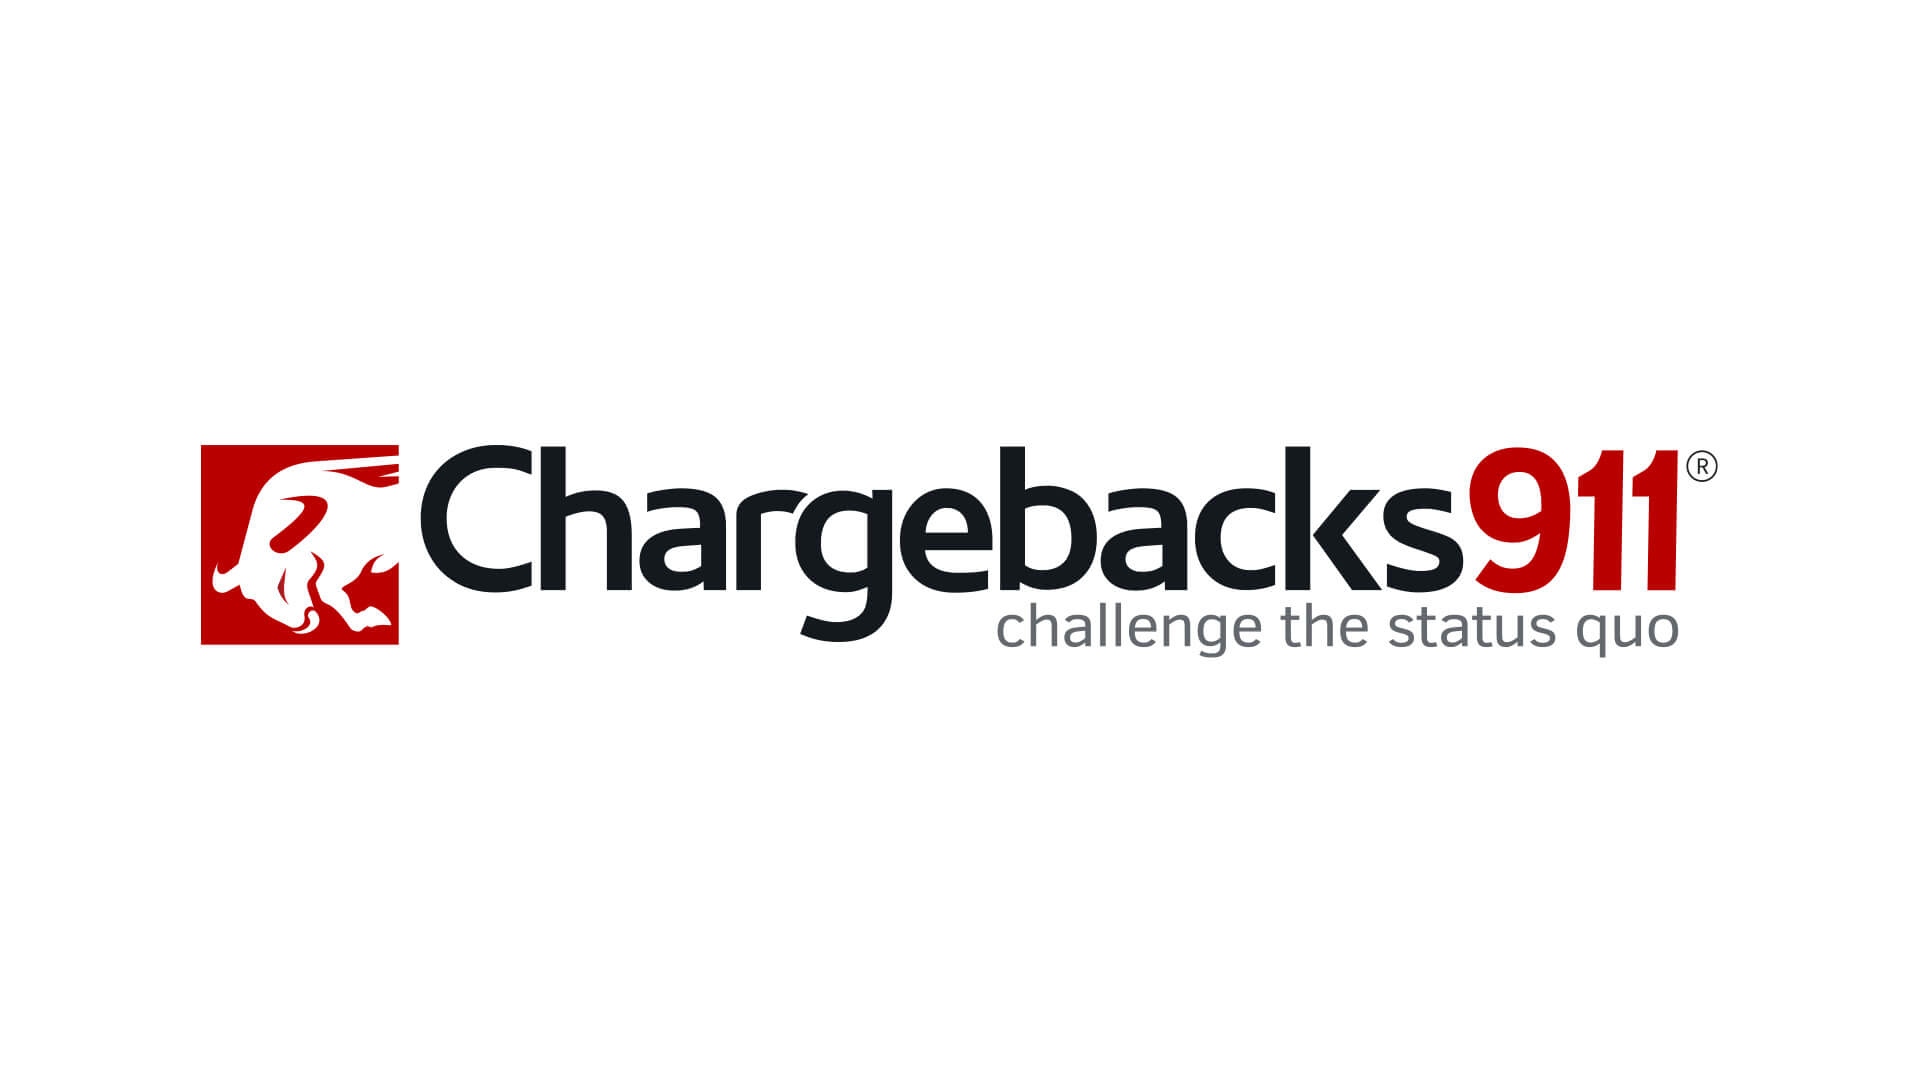 Chargebacks911 Appoints Ex Ingenico CRO and Payments Powerhouse David Jimenez, to Chief Revenue Officer